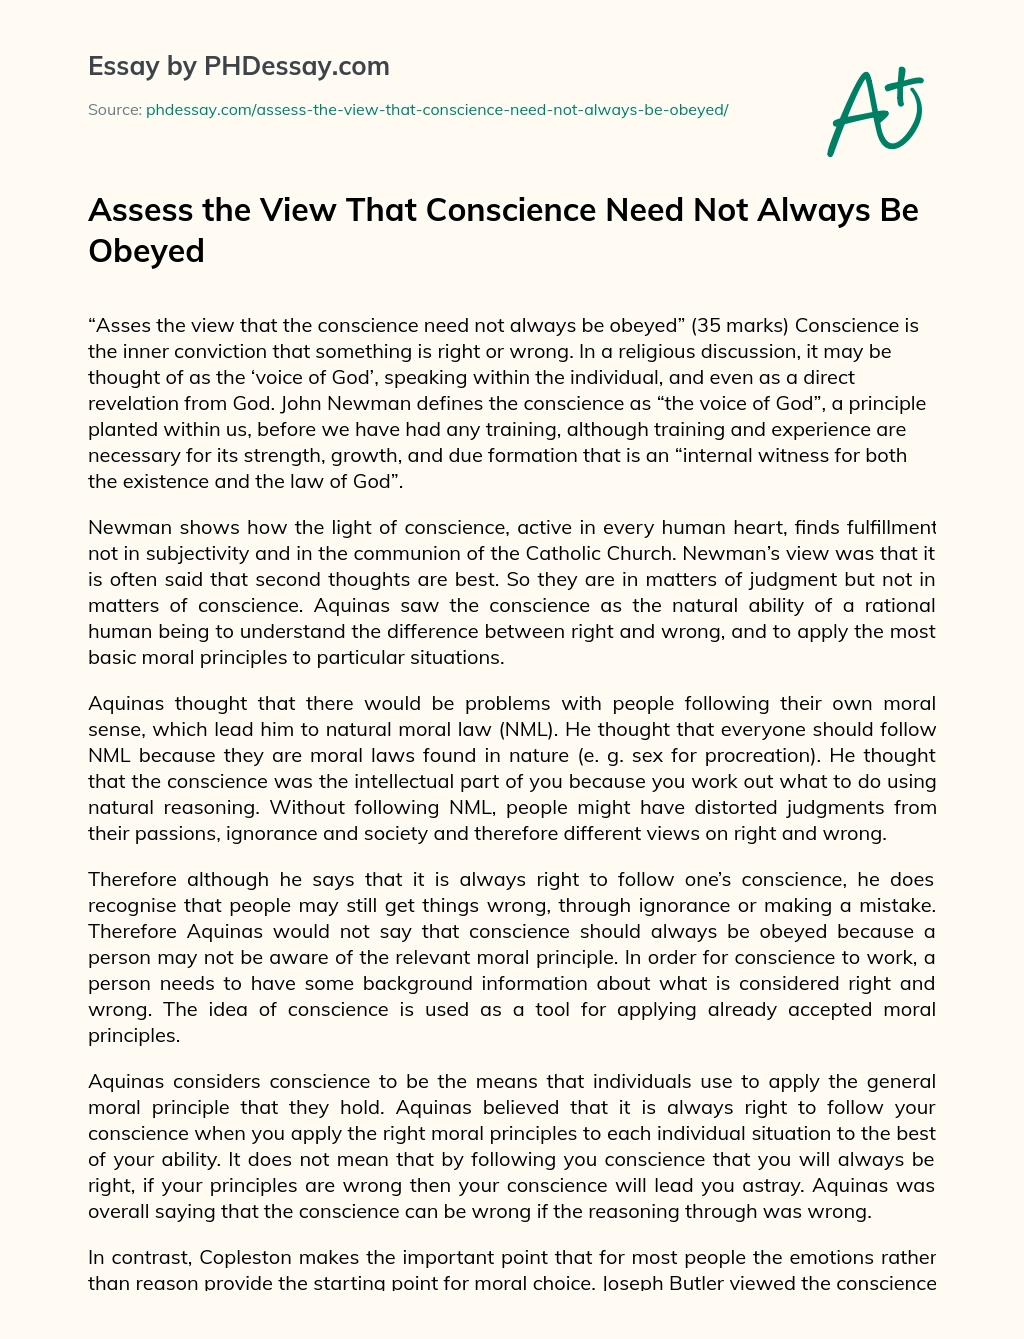 Assess the View That Conscience Need Not Always Be Obeyed essay